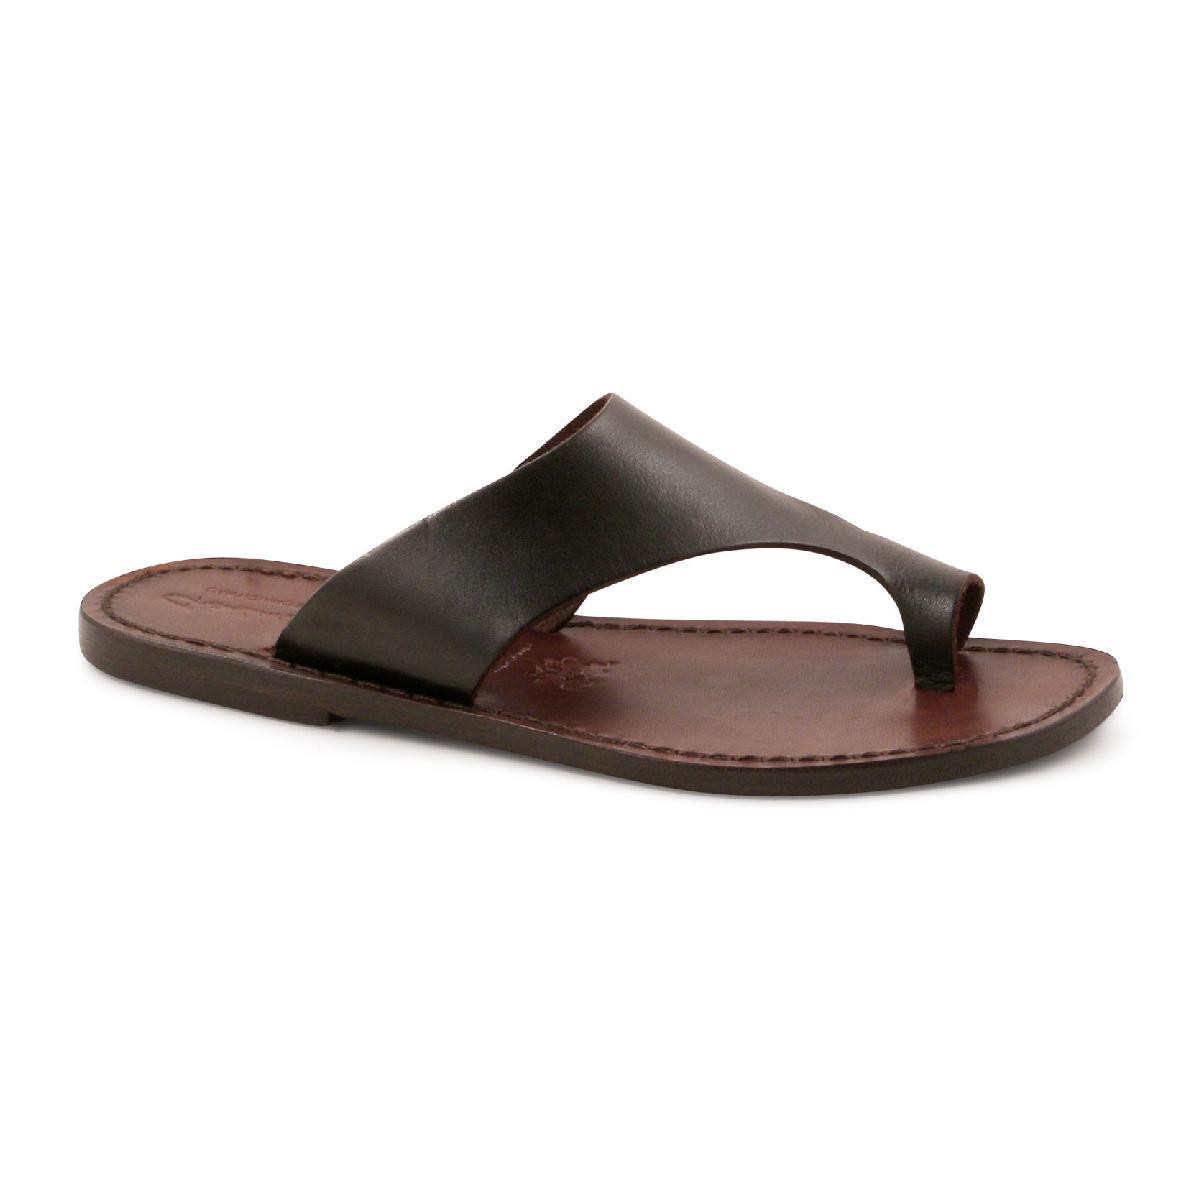 Brown leather thong sandals for women handmade | The leather craftsmen